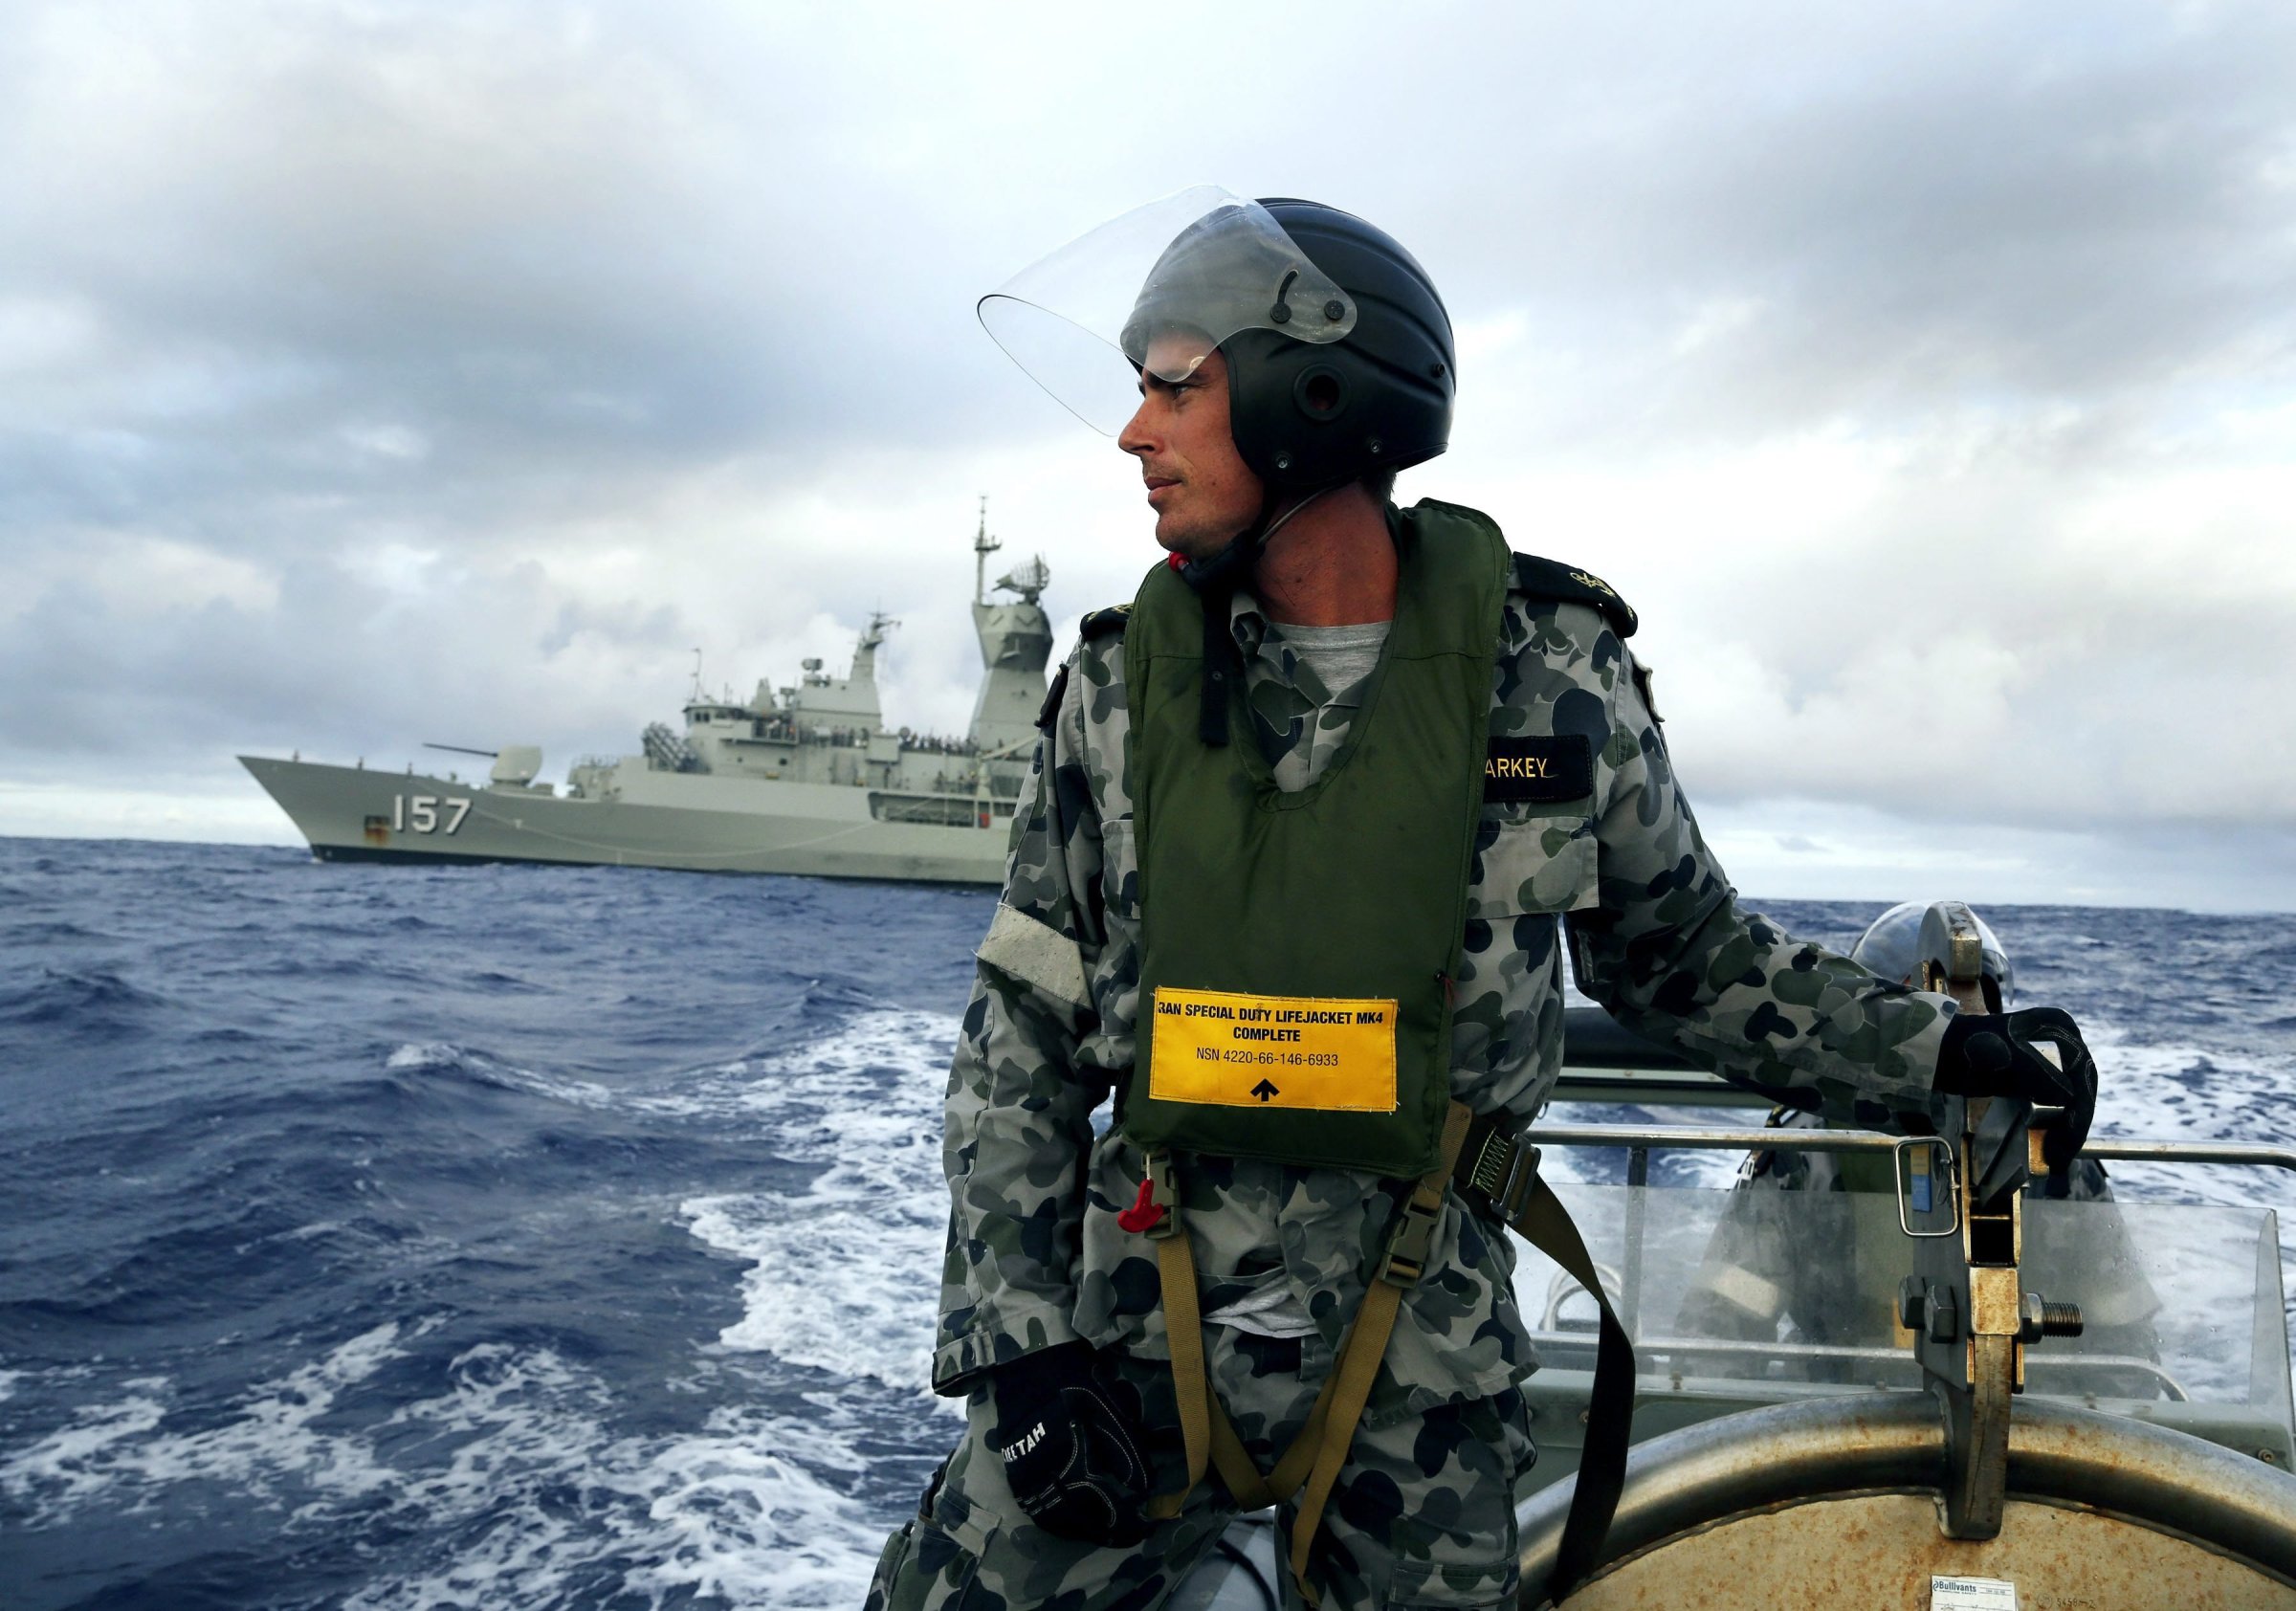 Leading Seaman, Boatswain's Mate, William Sharkey searches for debris at sea in the Southern Indian Ocean on April 6, 2014.